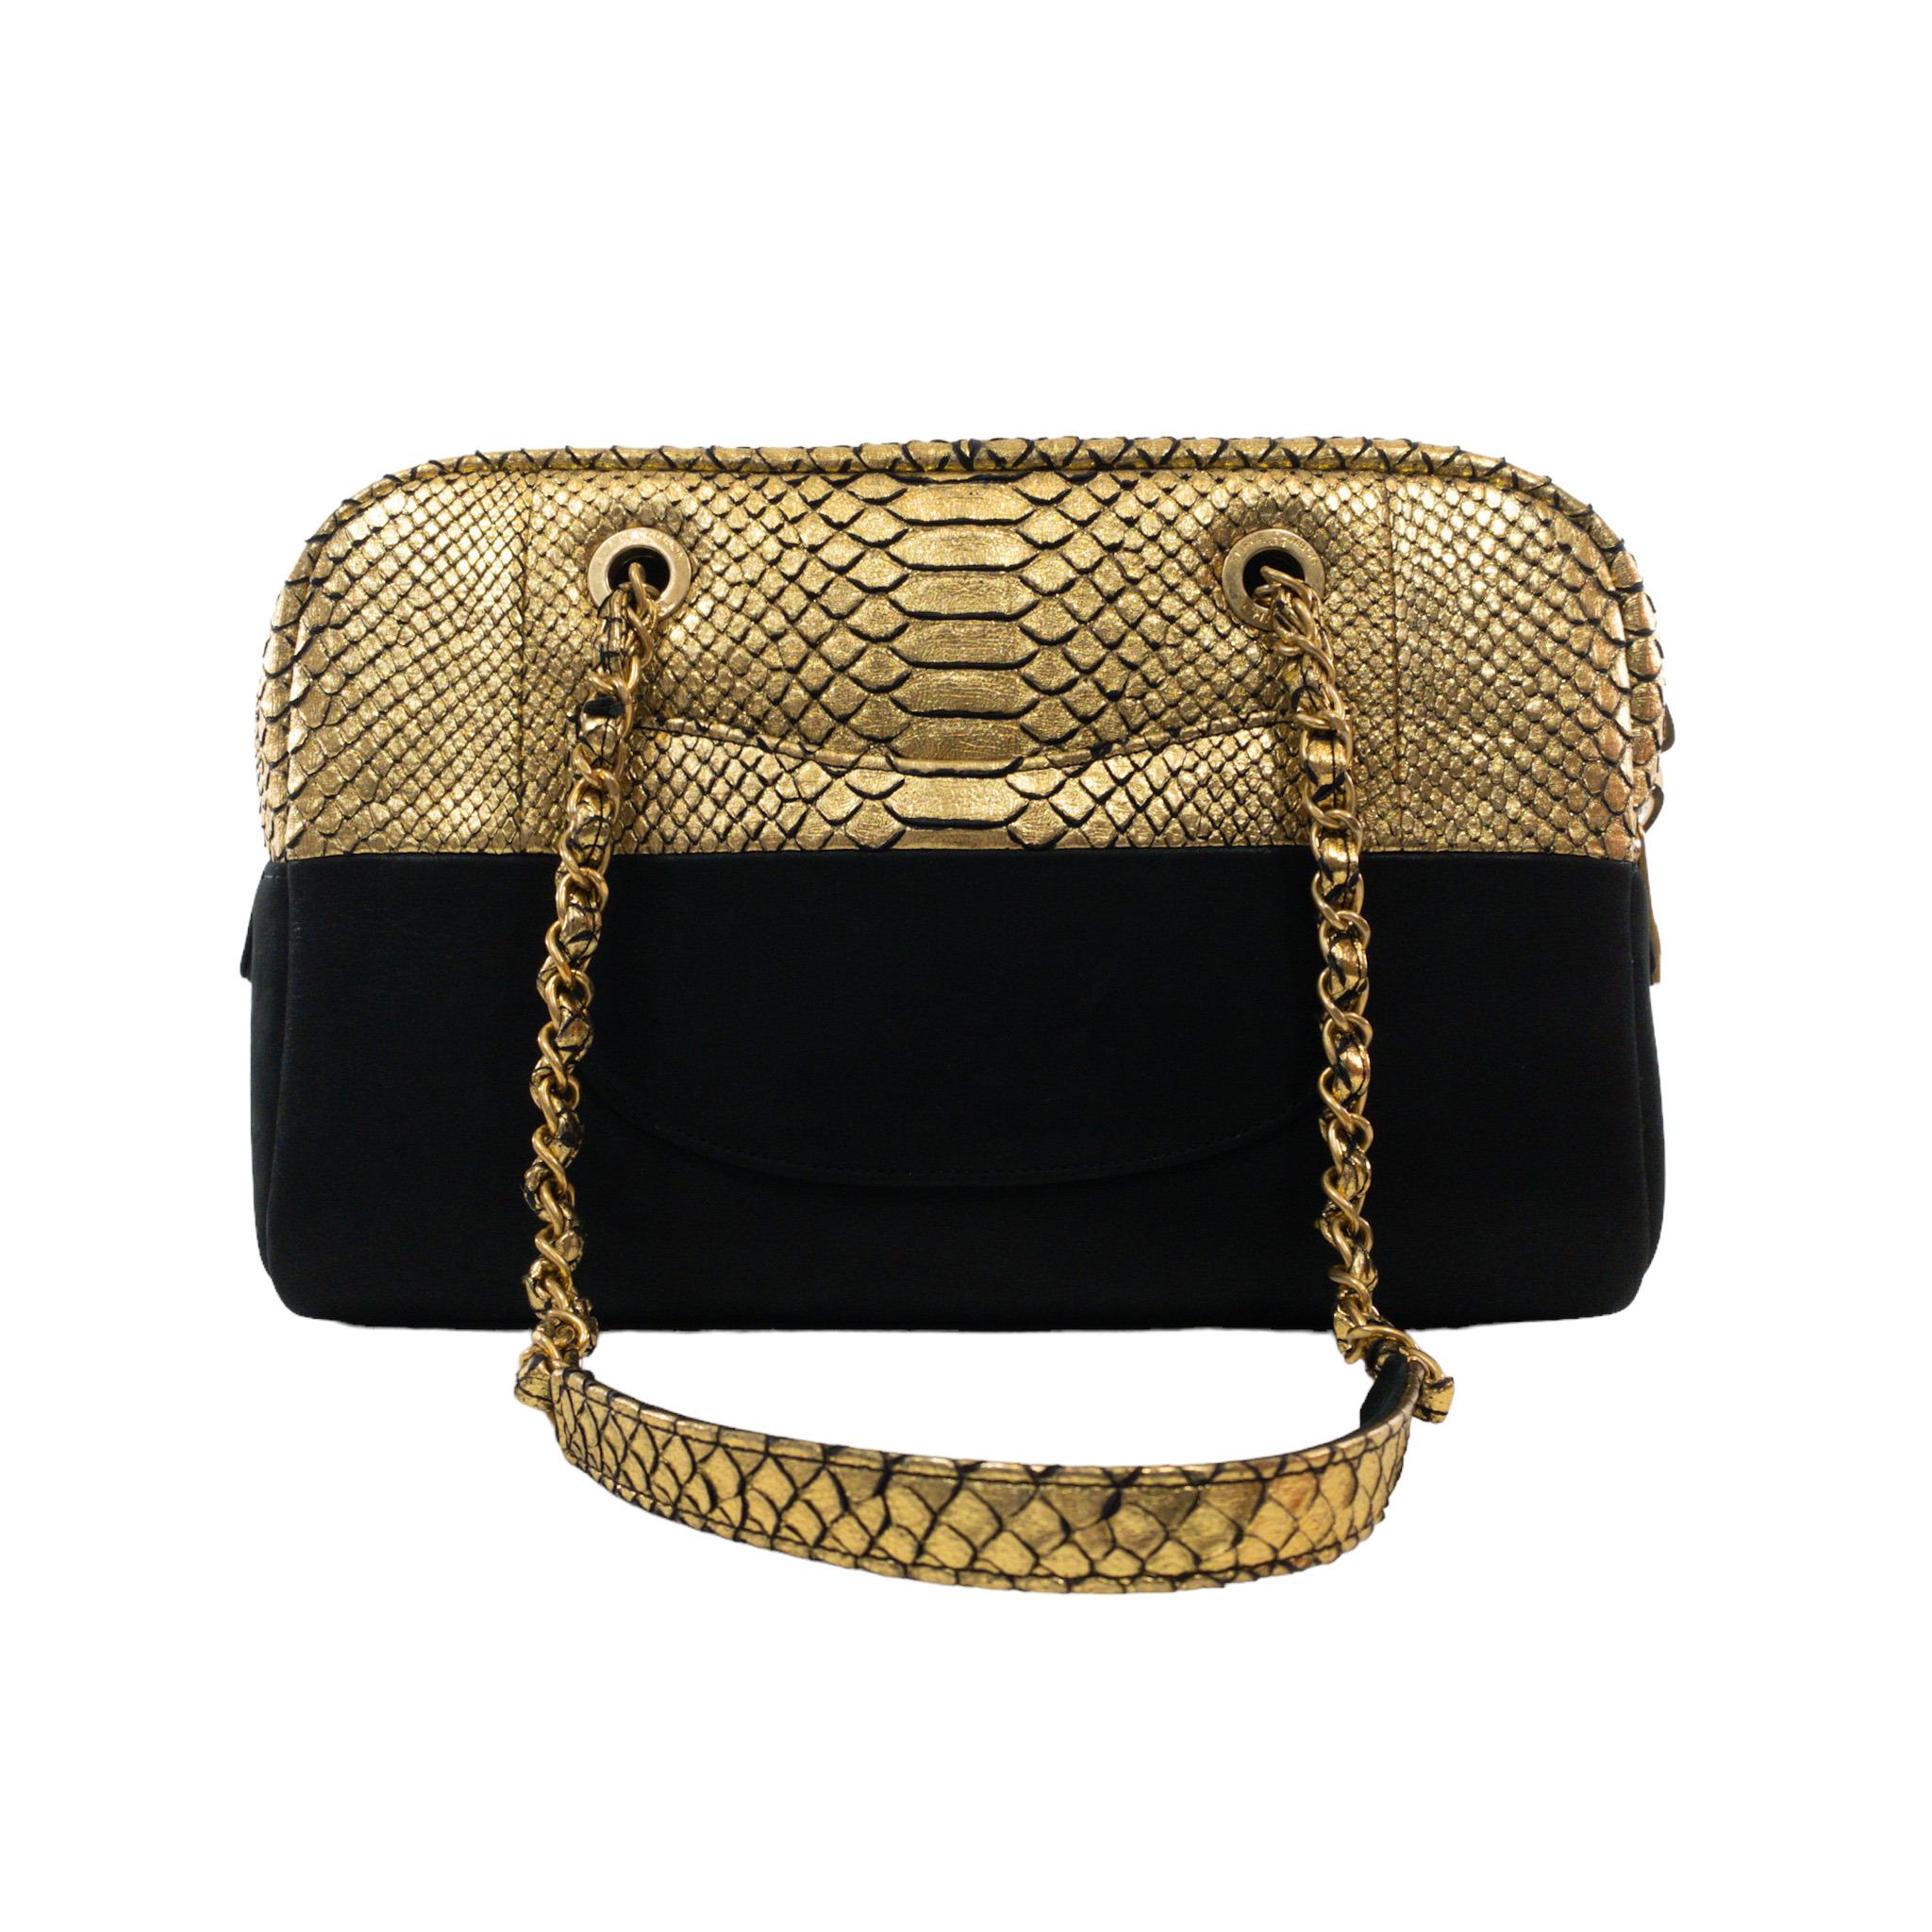 Chanel Metallic Python Suede Bowler Tote Bag

This is an Authentic Chanel Bicolor Python and suede bowler bag. Metallic gold painted snakeskin with black suede. Two woven chain straps with zipped top opening. CC charm on front strap. Large interior